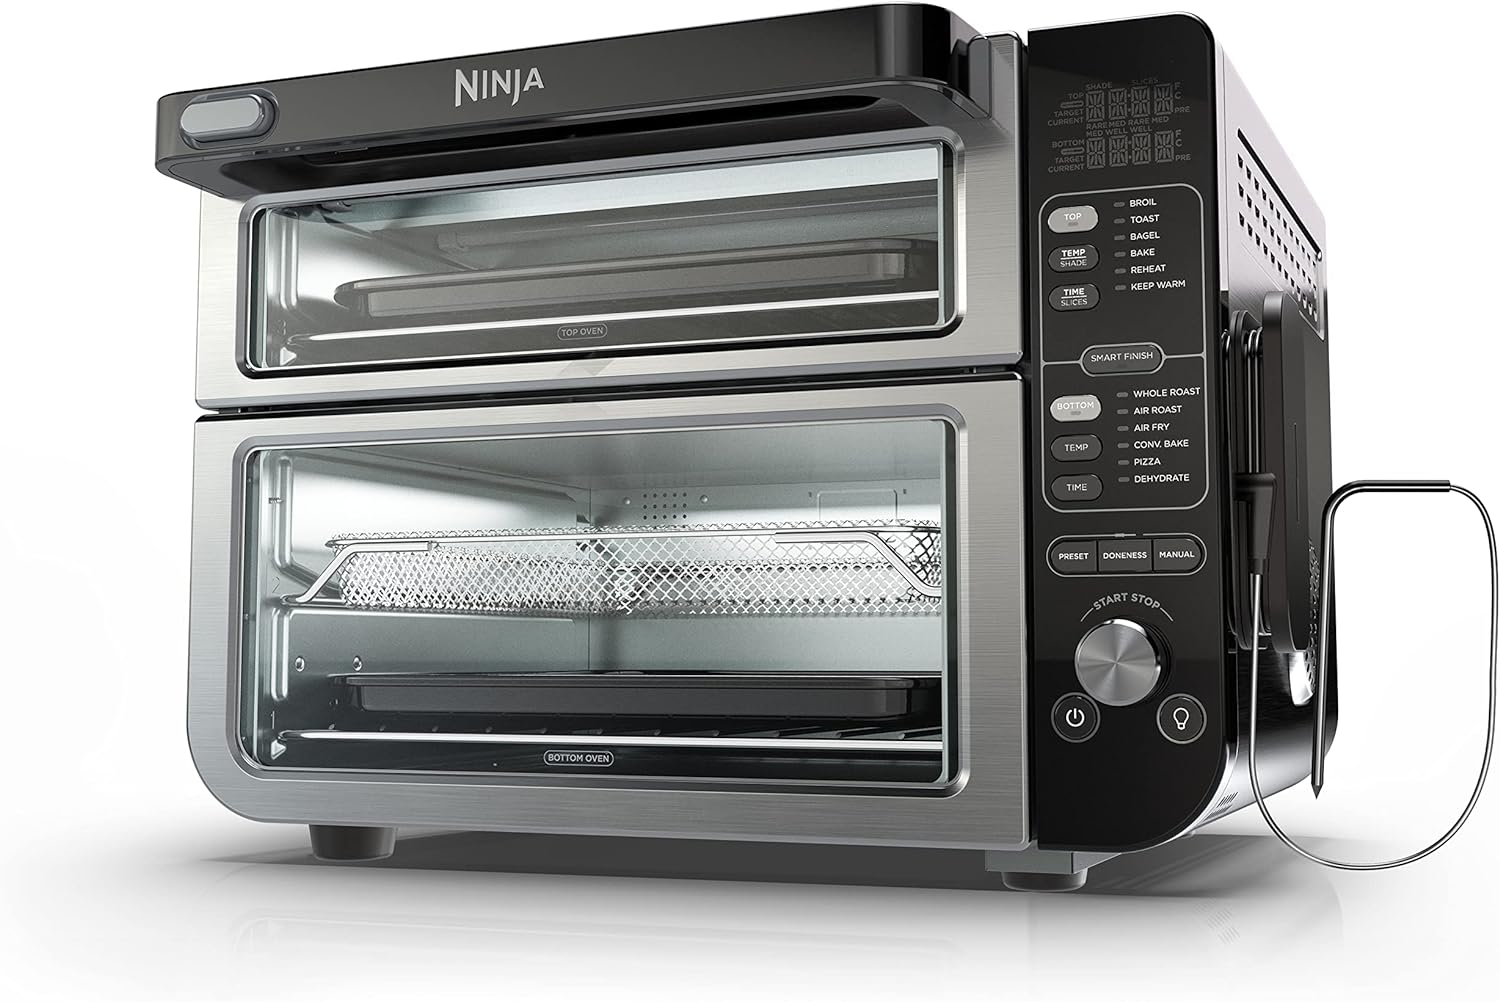 Ninja R-DCT451 12-in-1 Smart FlexDoor, Thermometer, Rapid Top Convection and Air Fry Bottom Double Oven, Stainless Steel - Certified Refurbished